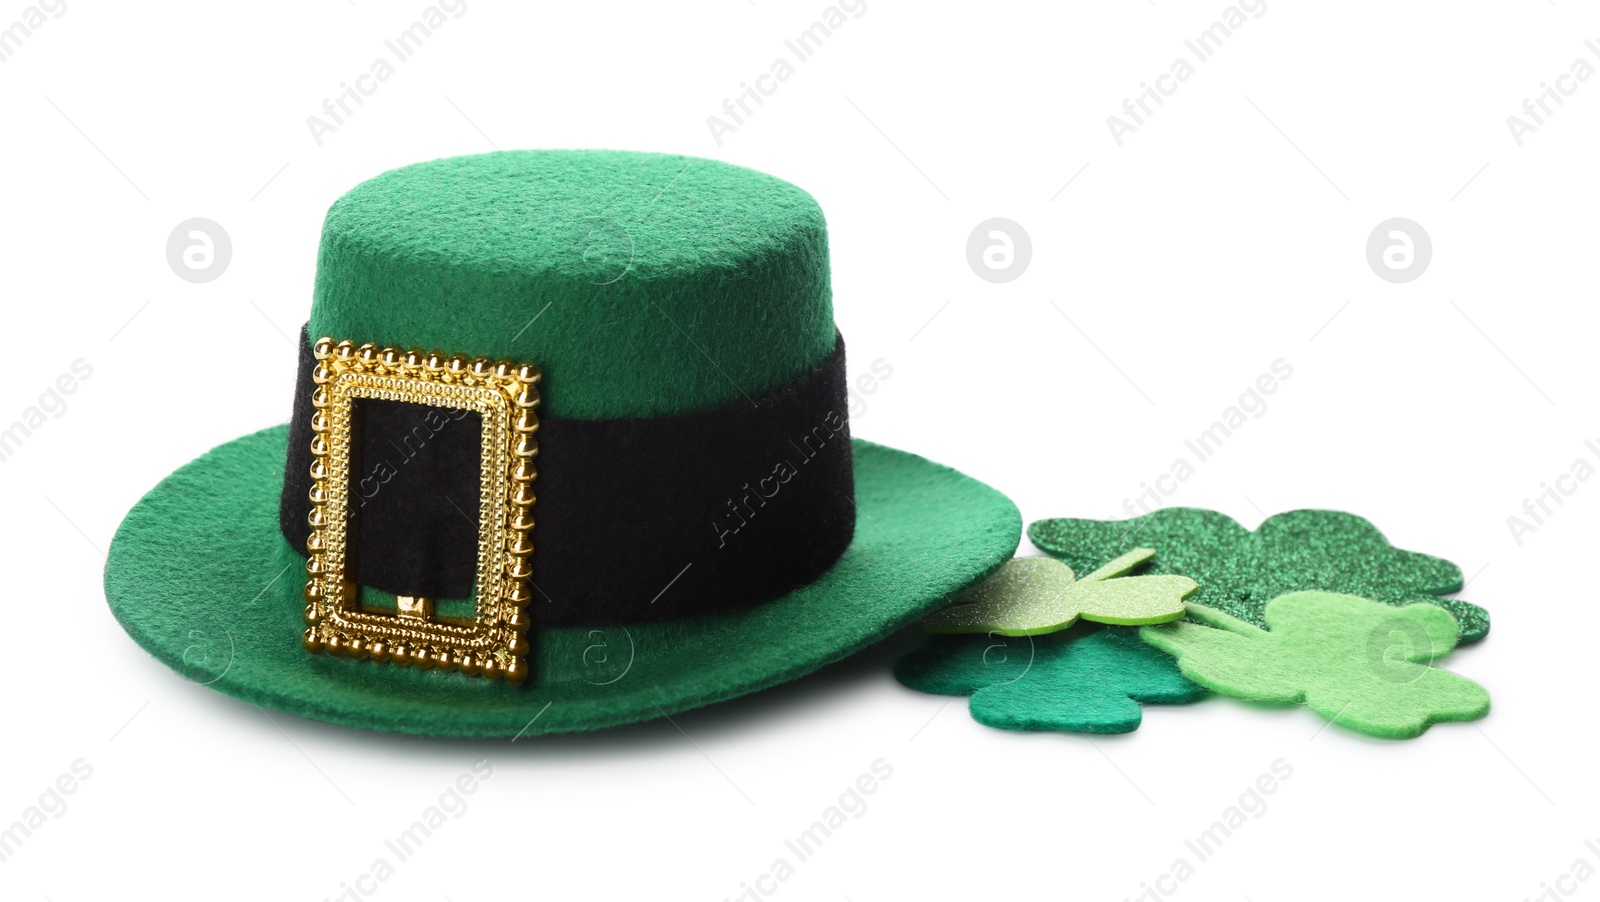 Photo of Leprechaun's hat and decorative clover leaves on white background. St. Patrick's day celebration